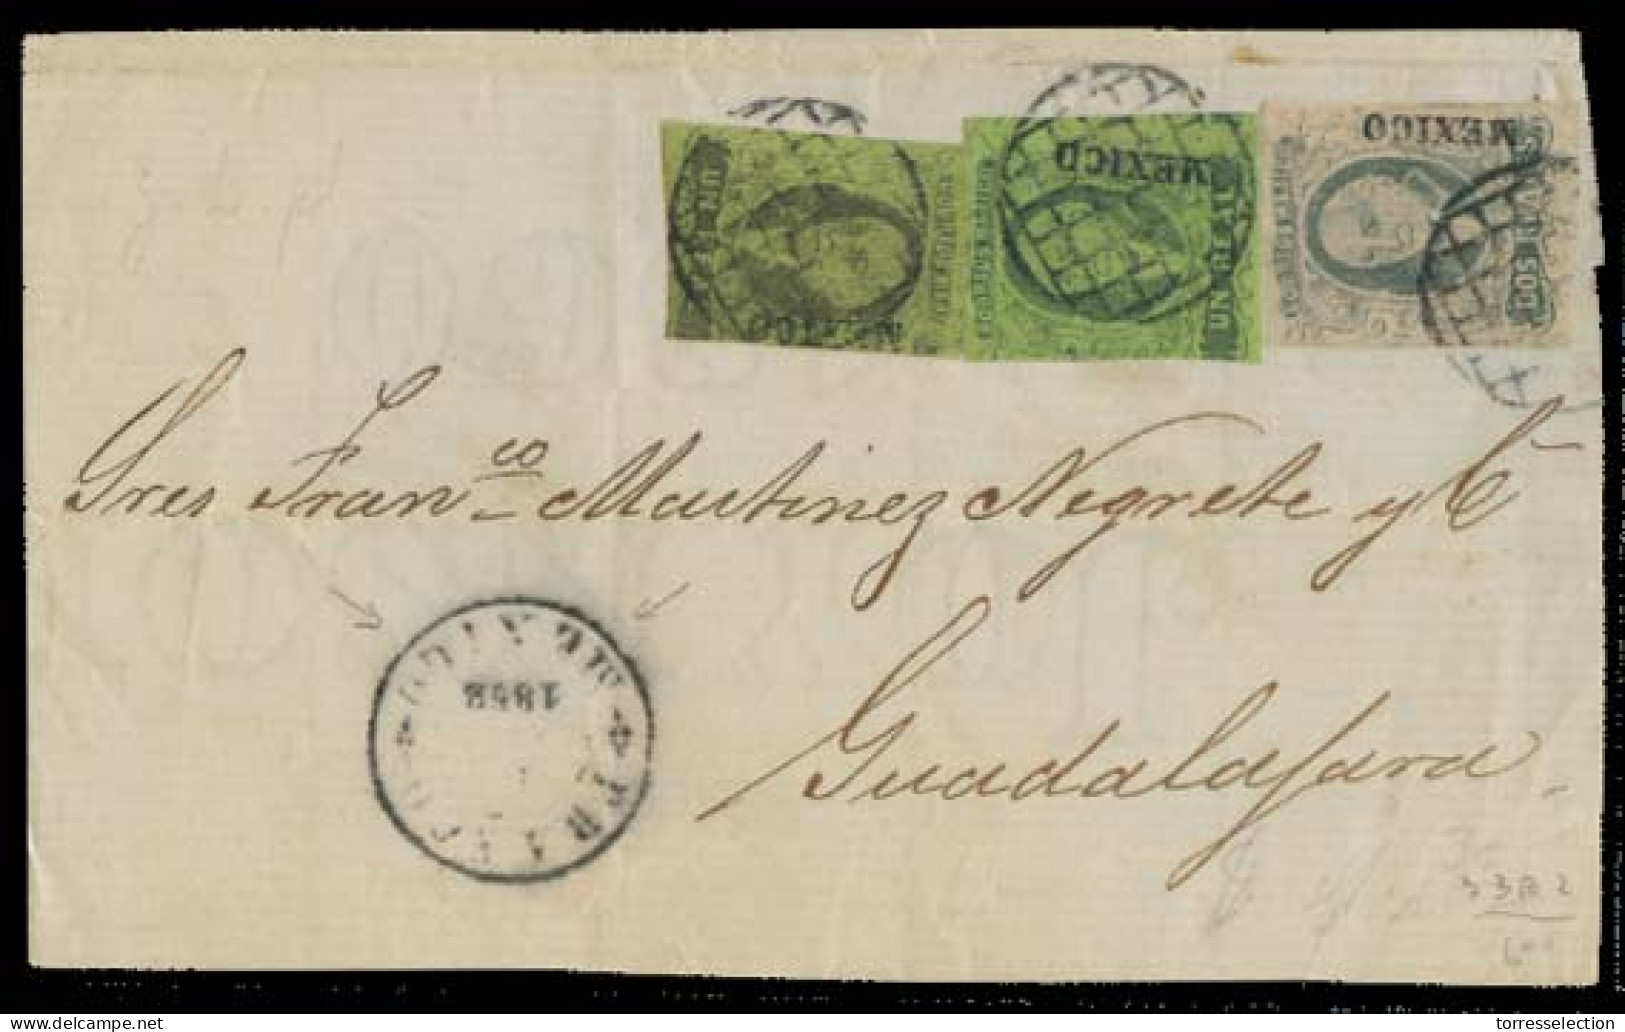 MEXICO. 1862. DF - Gjar. Fkd Front 1861 Issue 1rl Pair 2rs = 4rs Rate / Tied Grill + Franco / Mexico / 1852. Error Date. - México